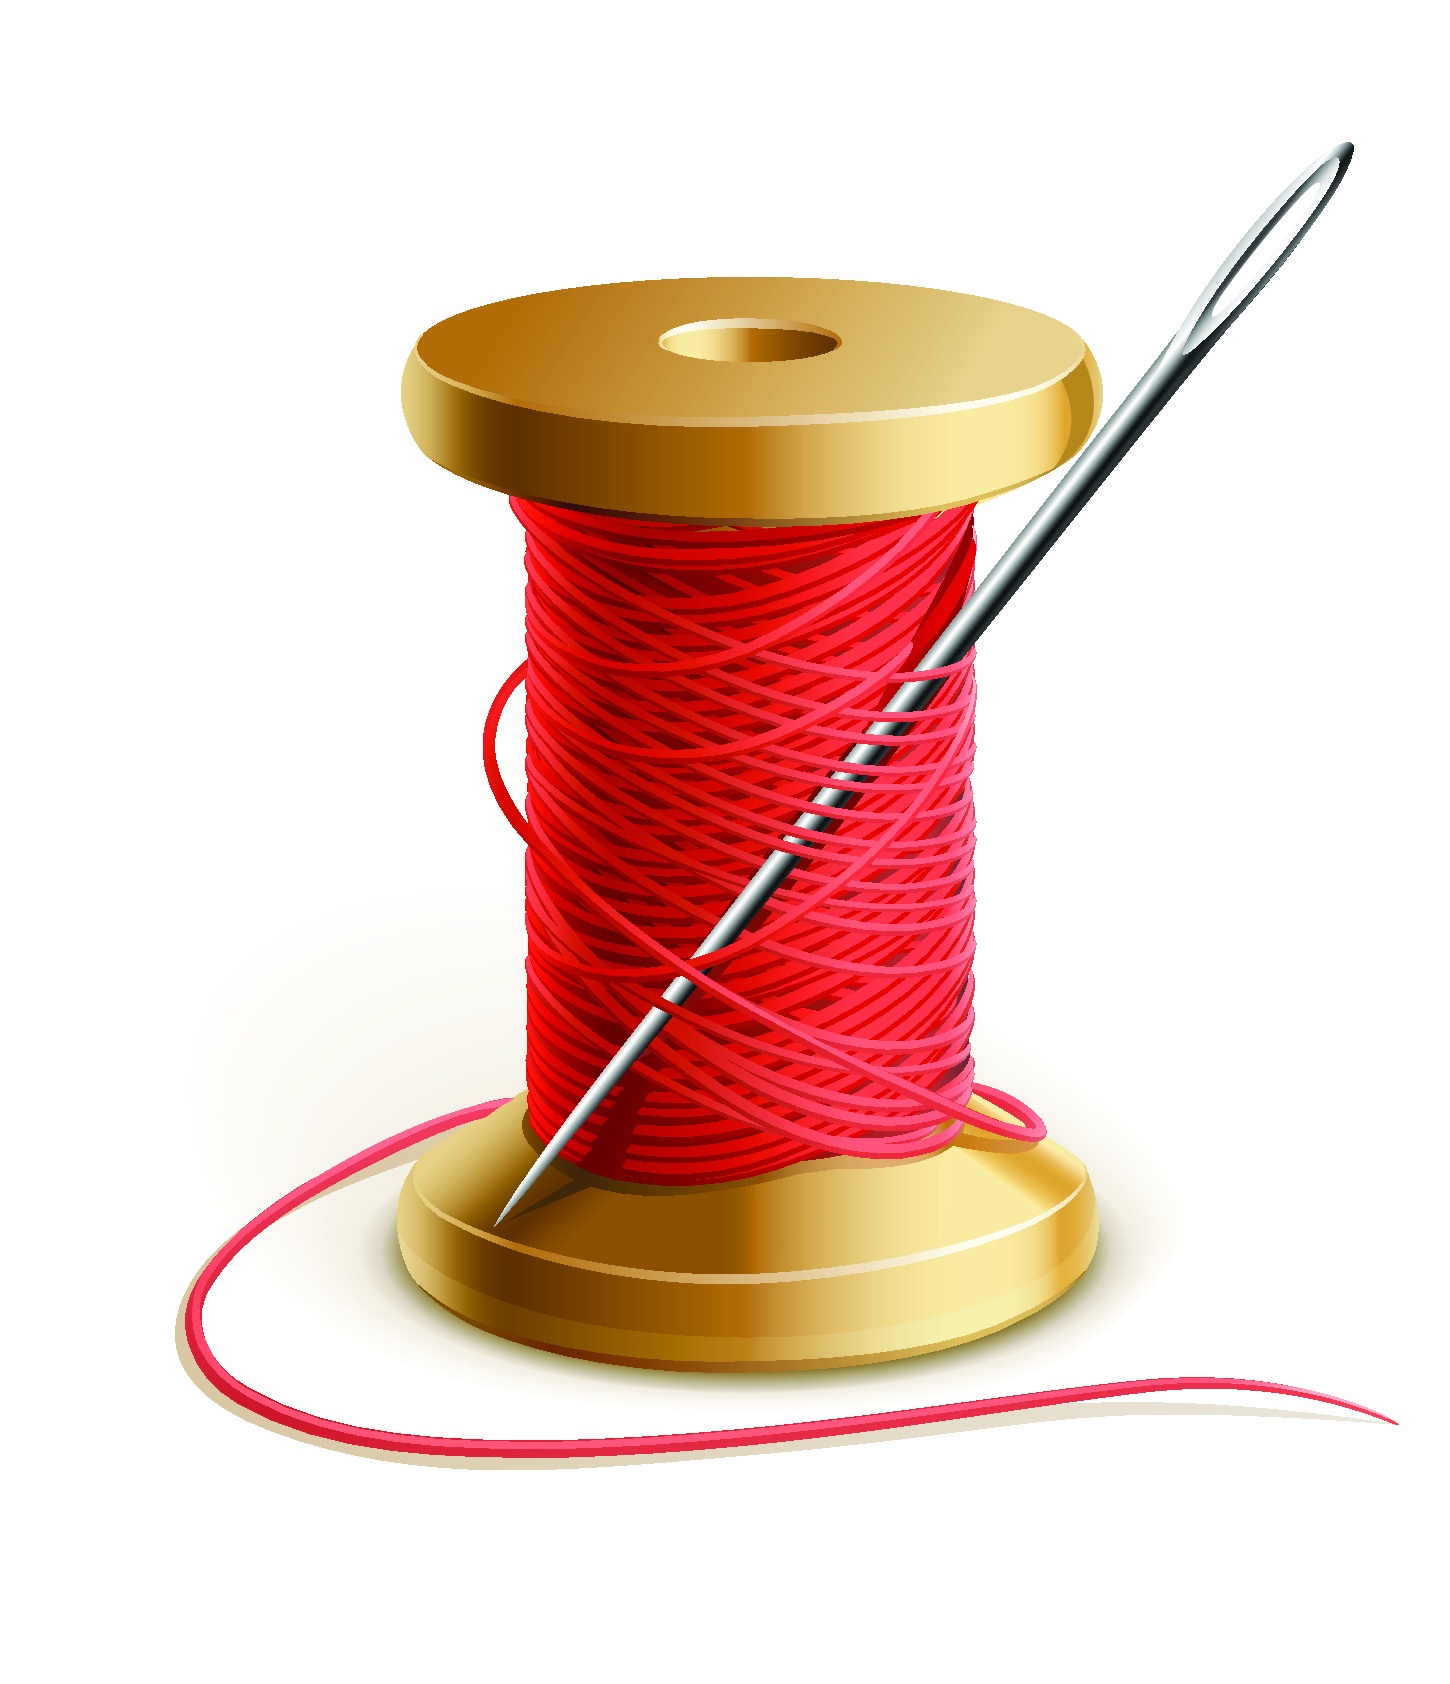 cotton reel with a needle